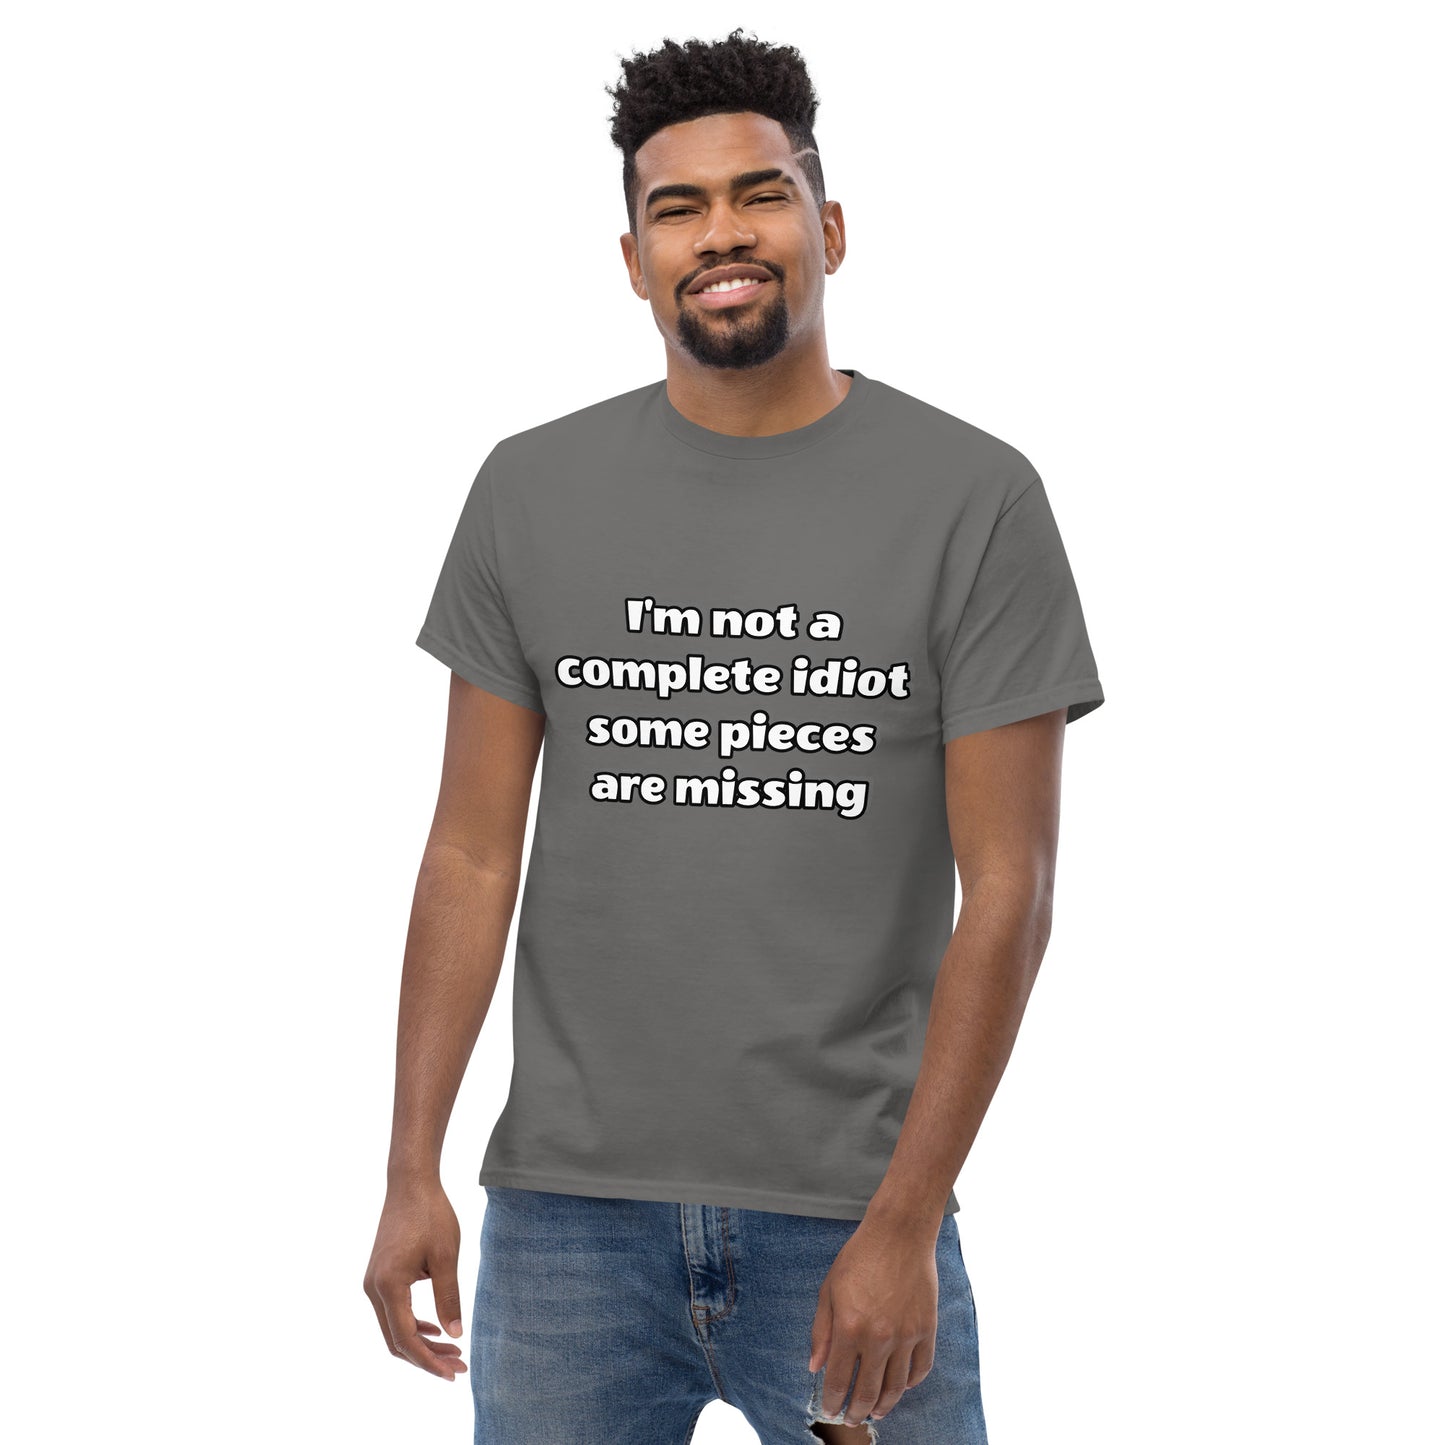 Men with charcoal t-shirt with text “I’m not a complete idiot, some pieces are missing”